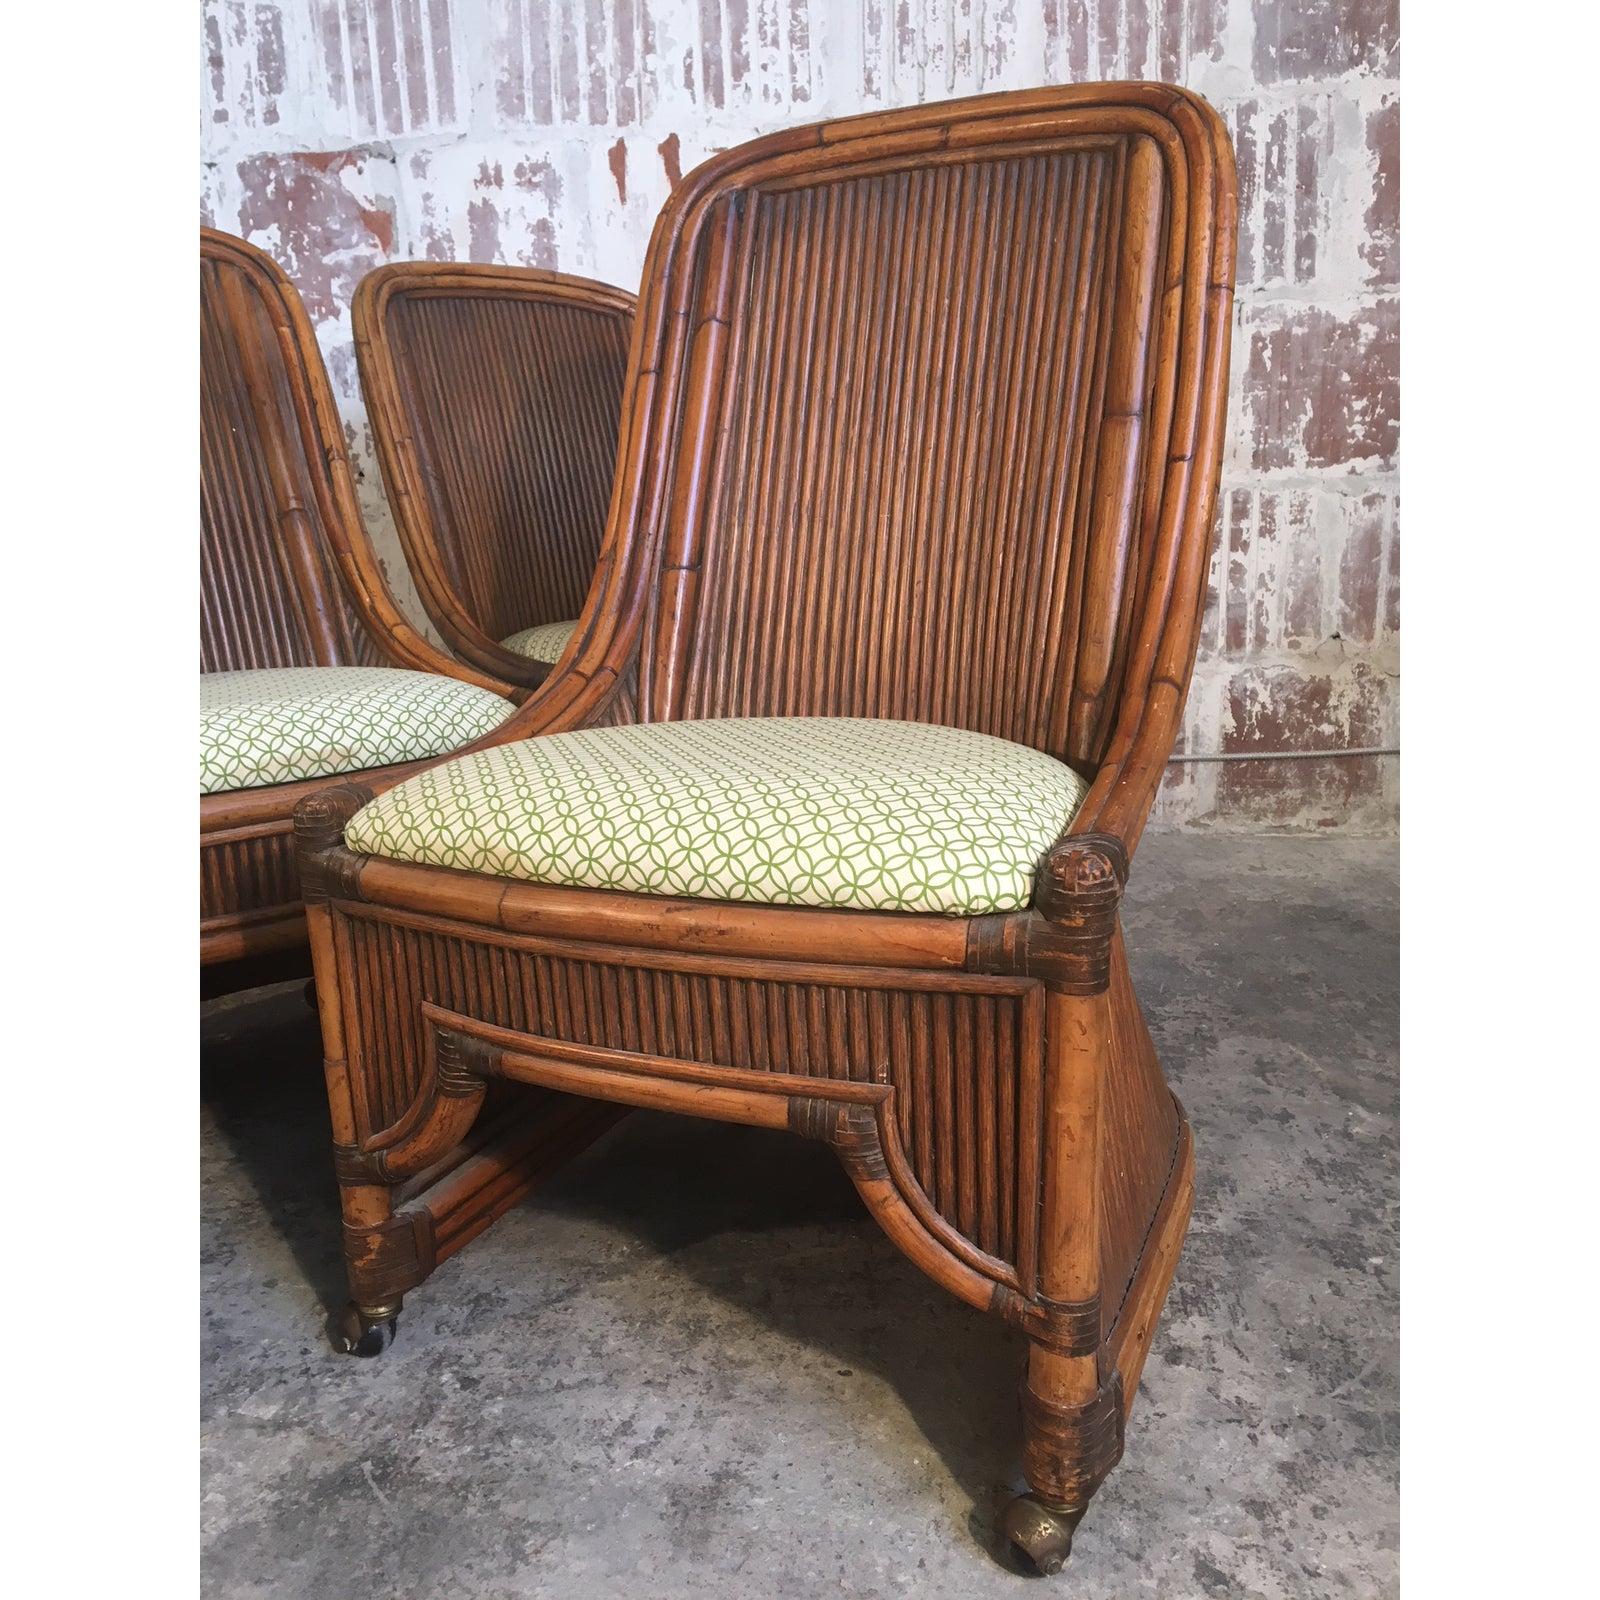 Set of 4 rattan dining chairs feature high back bamboo framework and caster wheels. Very good vintage condition with very minor signs of age appropriate wear. Upholstery free of stains or wear.